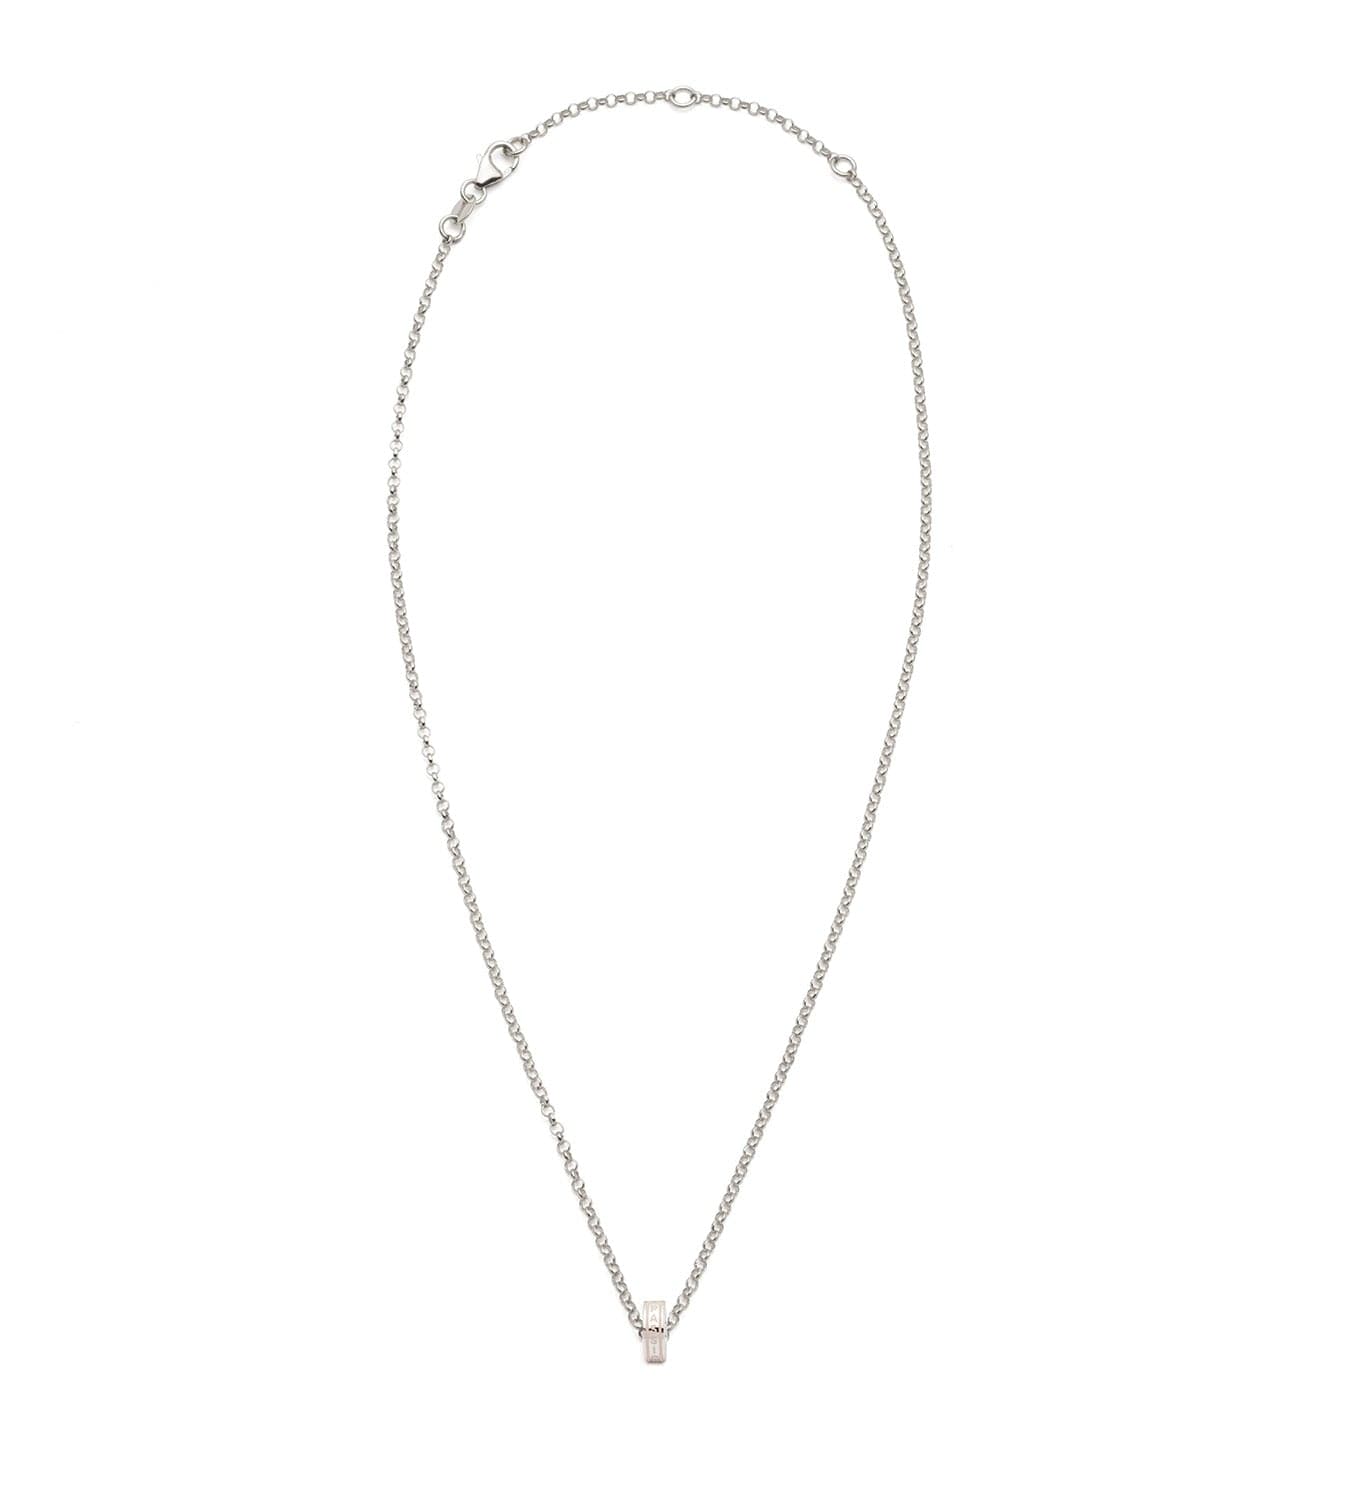 Live Passionately : Heart Beat Fine Belcher Chain Necklace White Gold